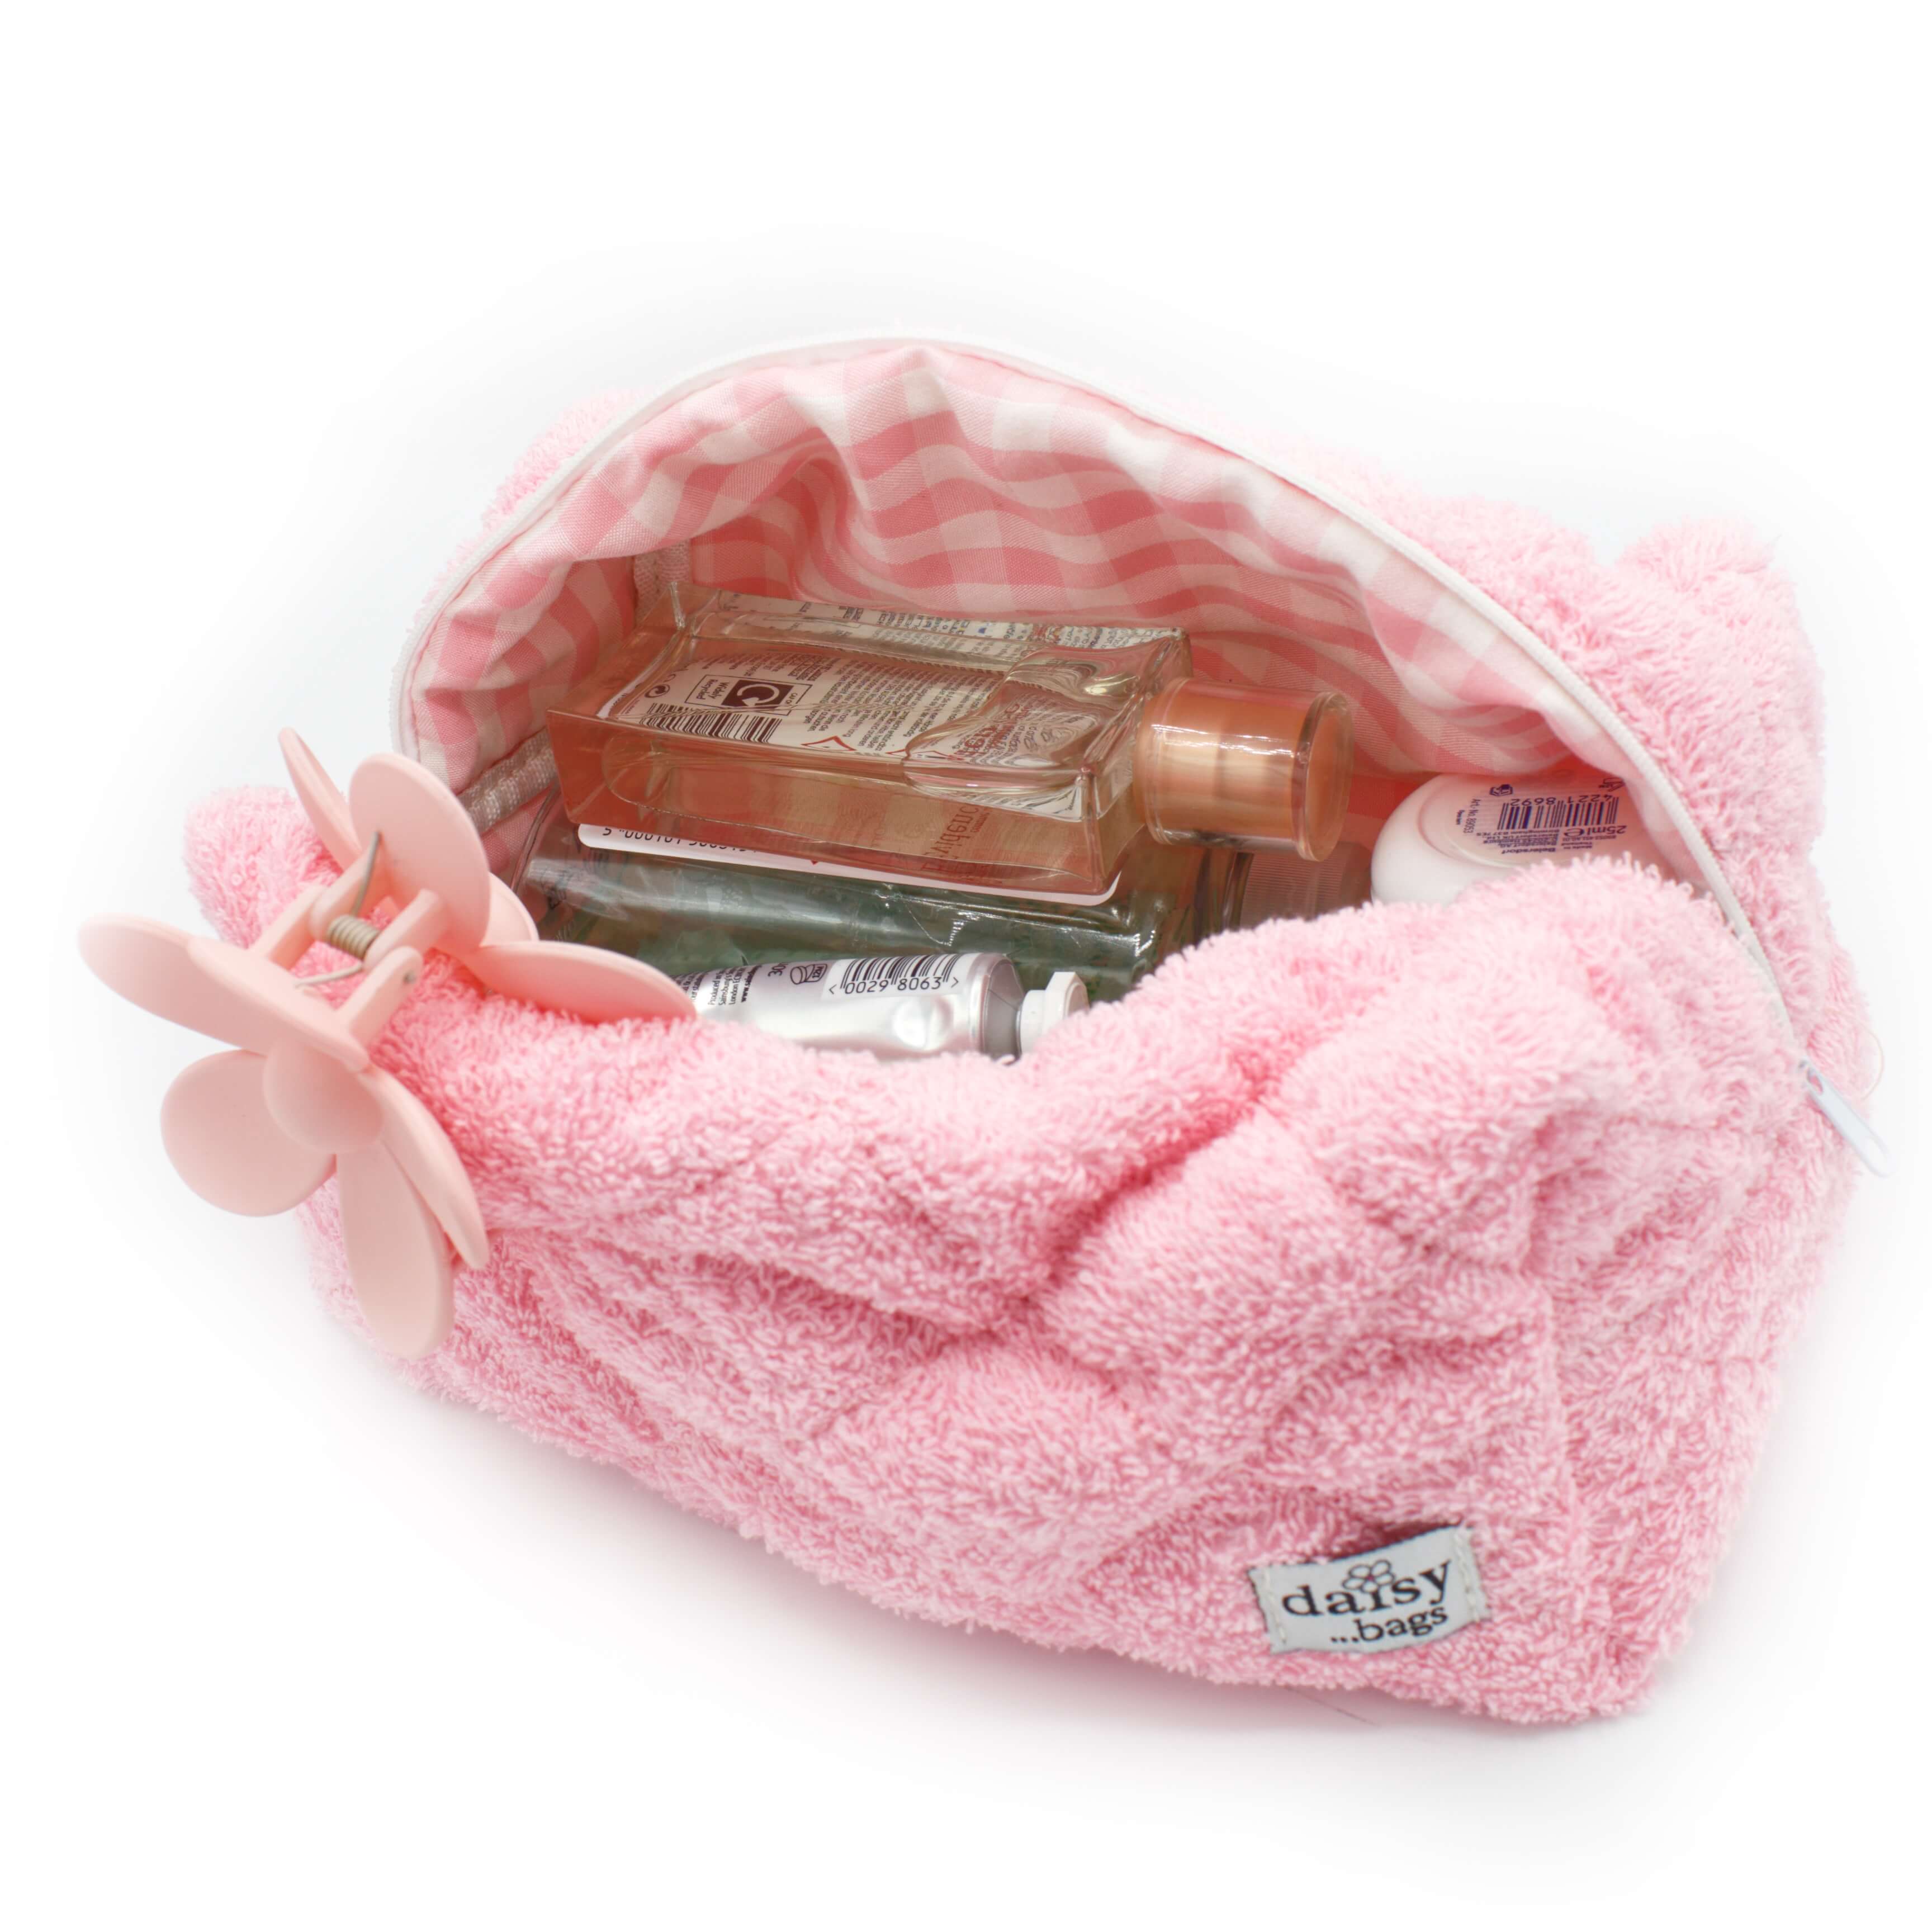 The Leela pink makeup bag on a white background